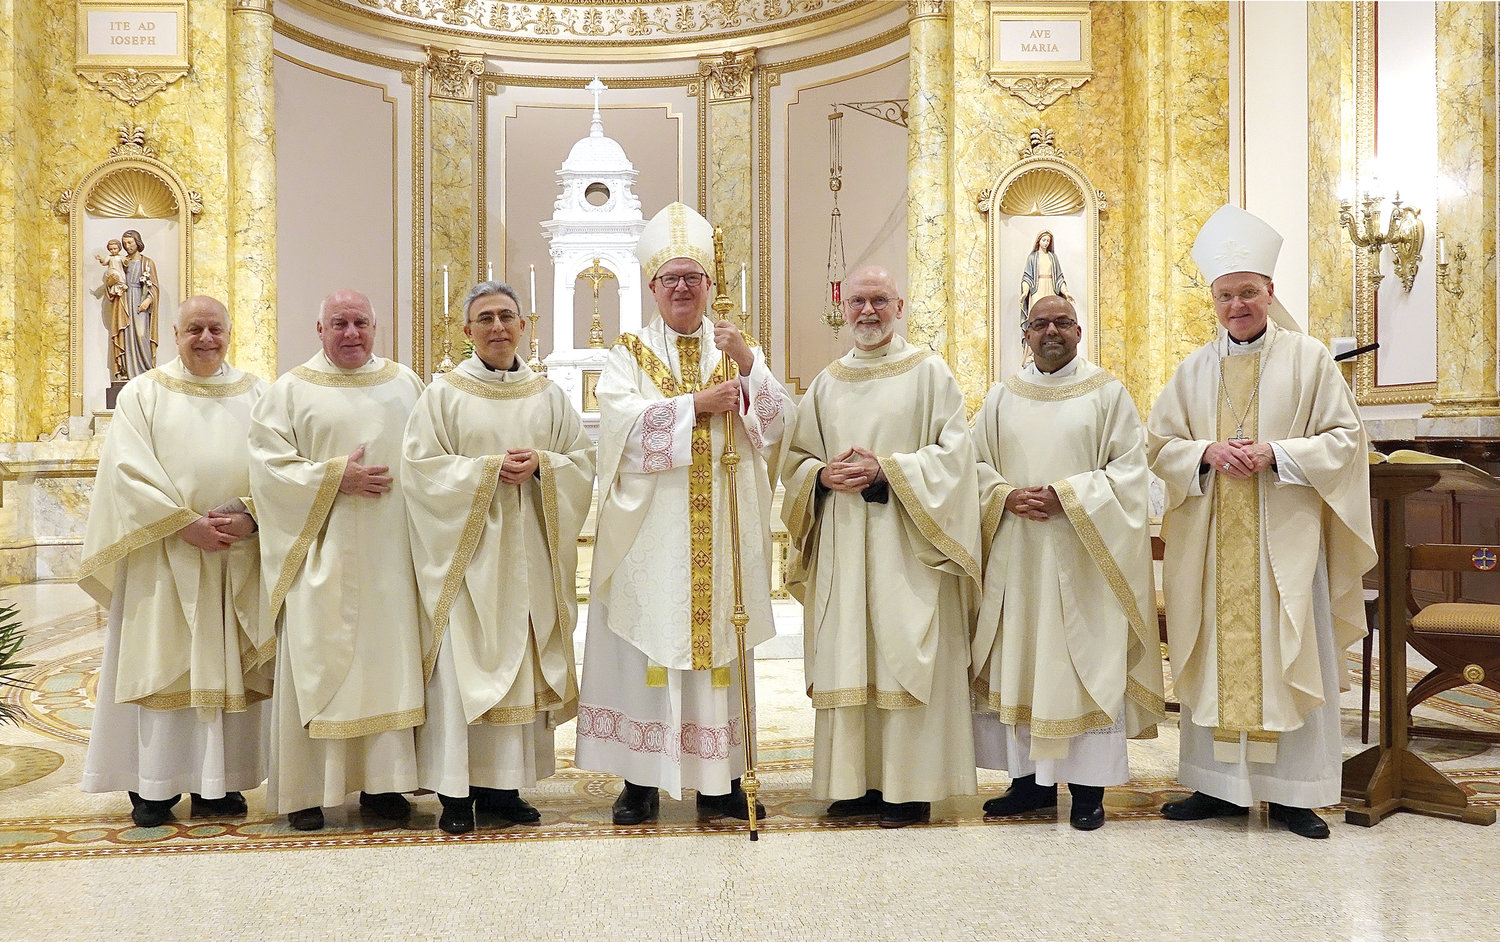 Members of the Ordination Class of 1995 join Cardinal Dolan, center, and Msgr. Joseph LaMorte, vicar general and moderator of the curia, left, and Auxiliary Bishop Edmund Whalen, vicar for clergy, right. From left, the jubilarians are Father David Nolan, Father Jose Serrano, Father Donald Baker and Father Cosme Fernandes.